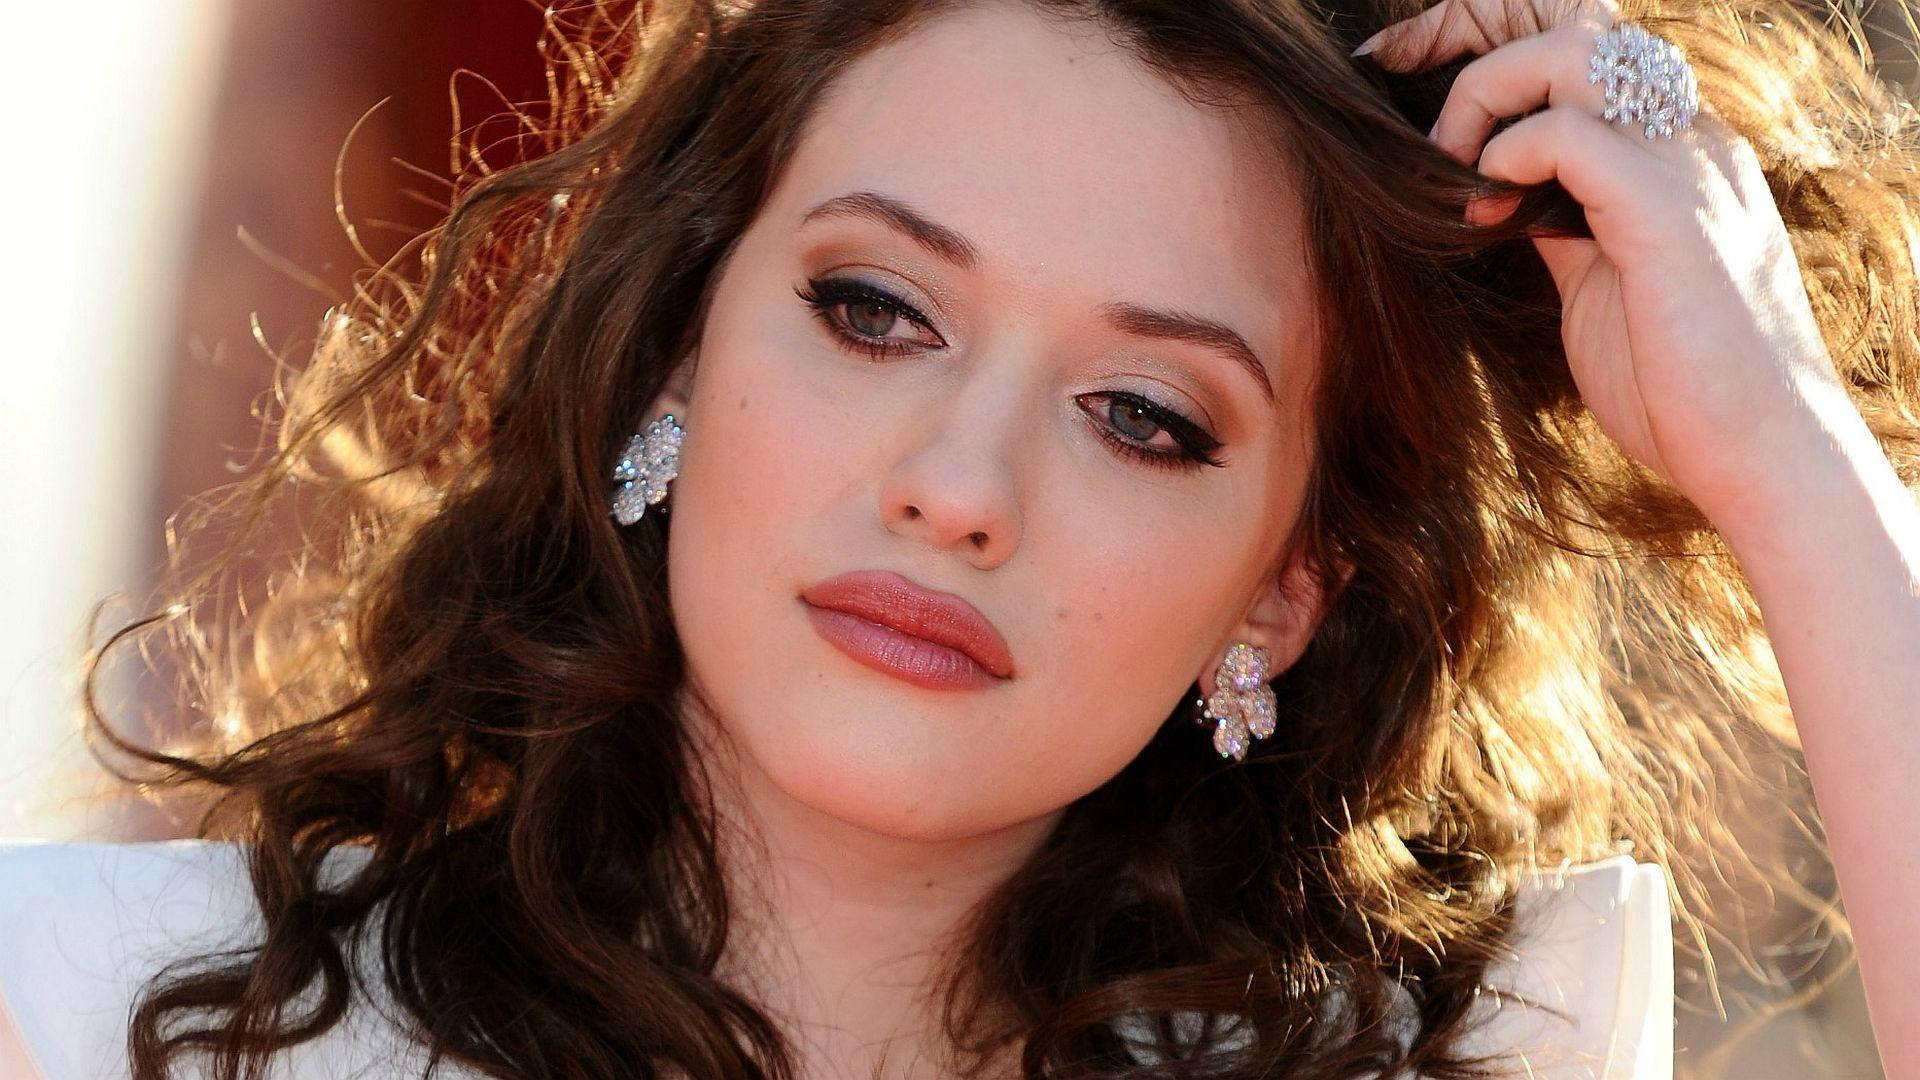 Kat Dennings Silver Jewelry 2011 Thor Premiere Background